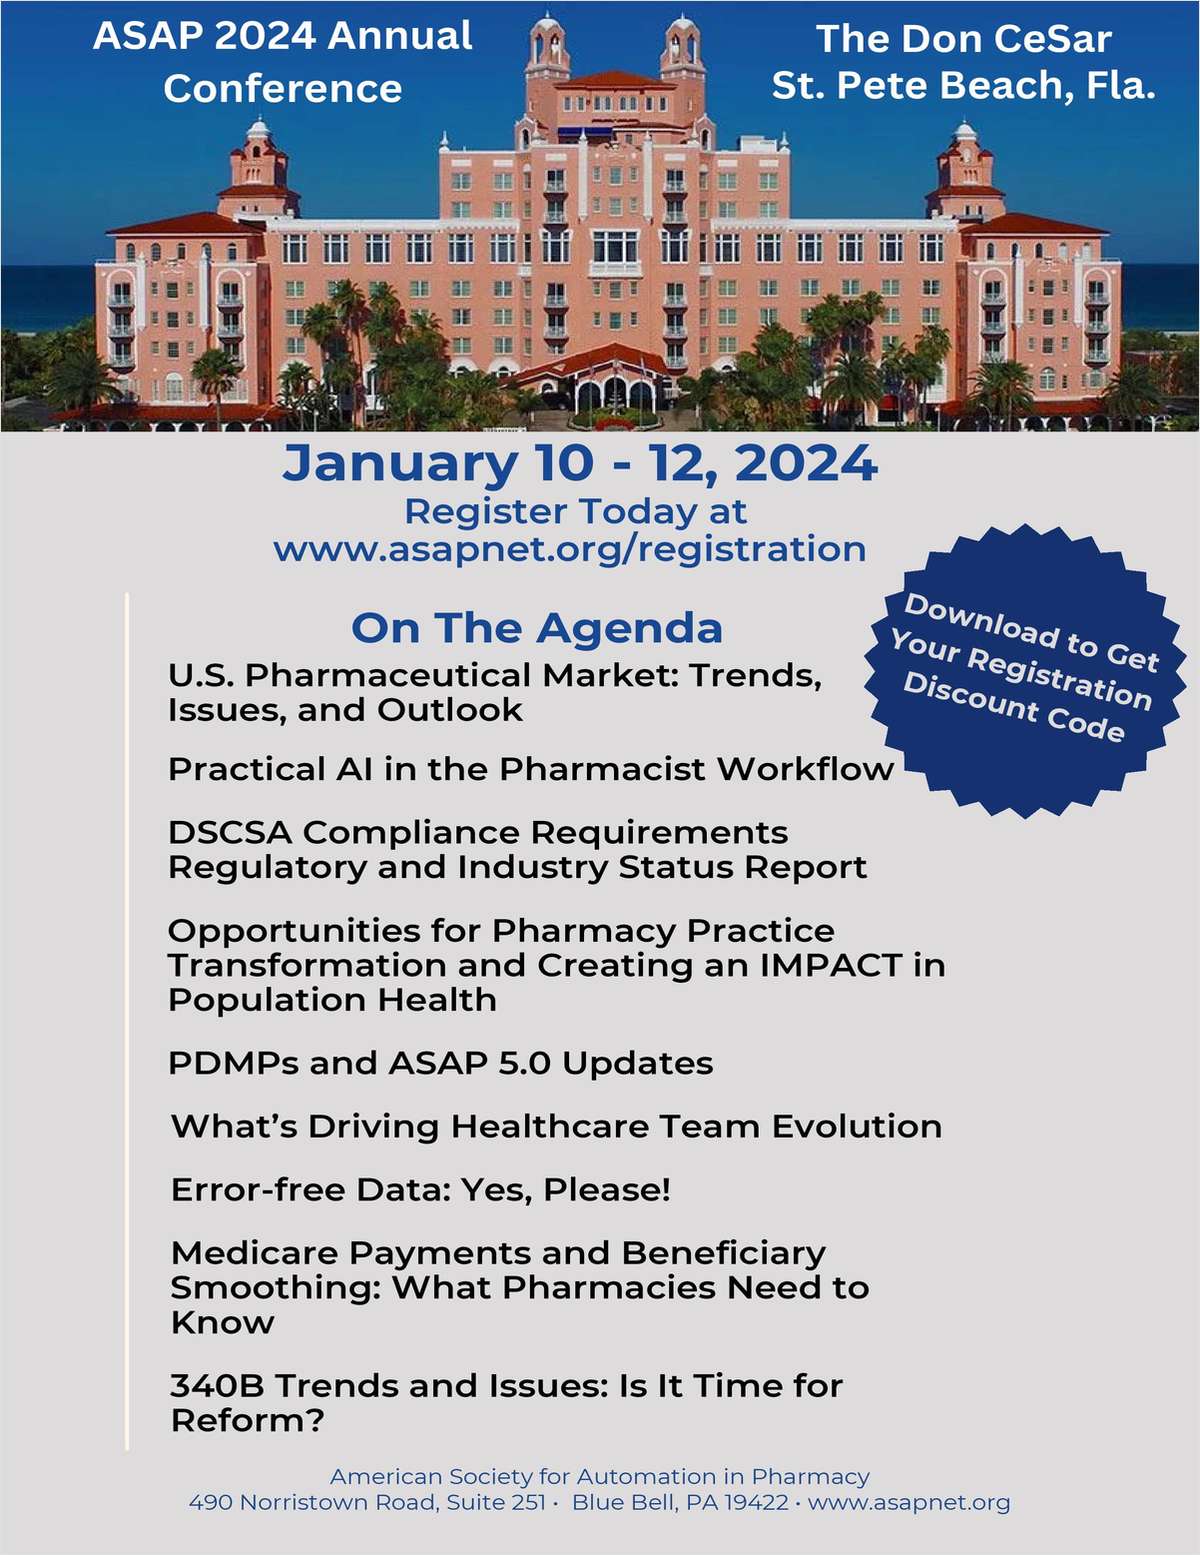 American Society for Automation in Pharmacy Conference 2024